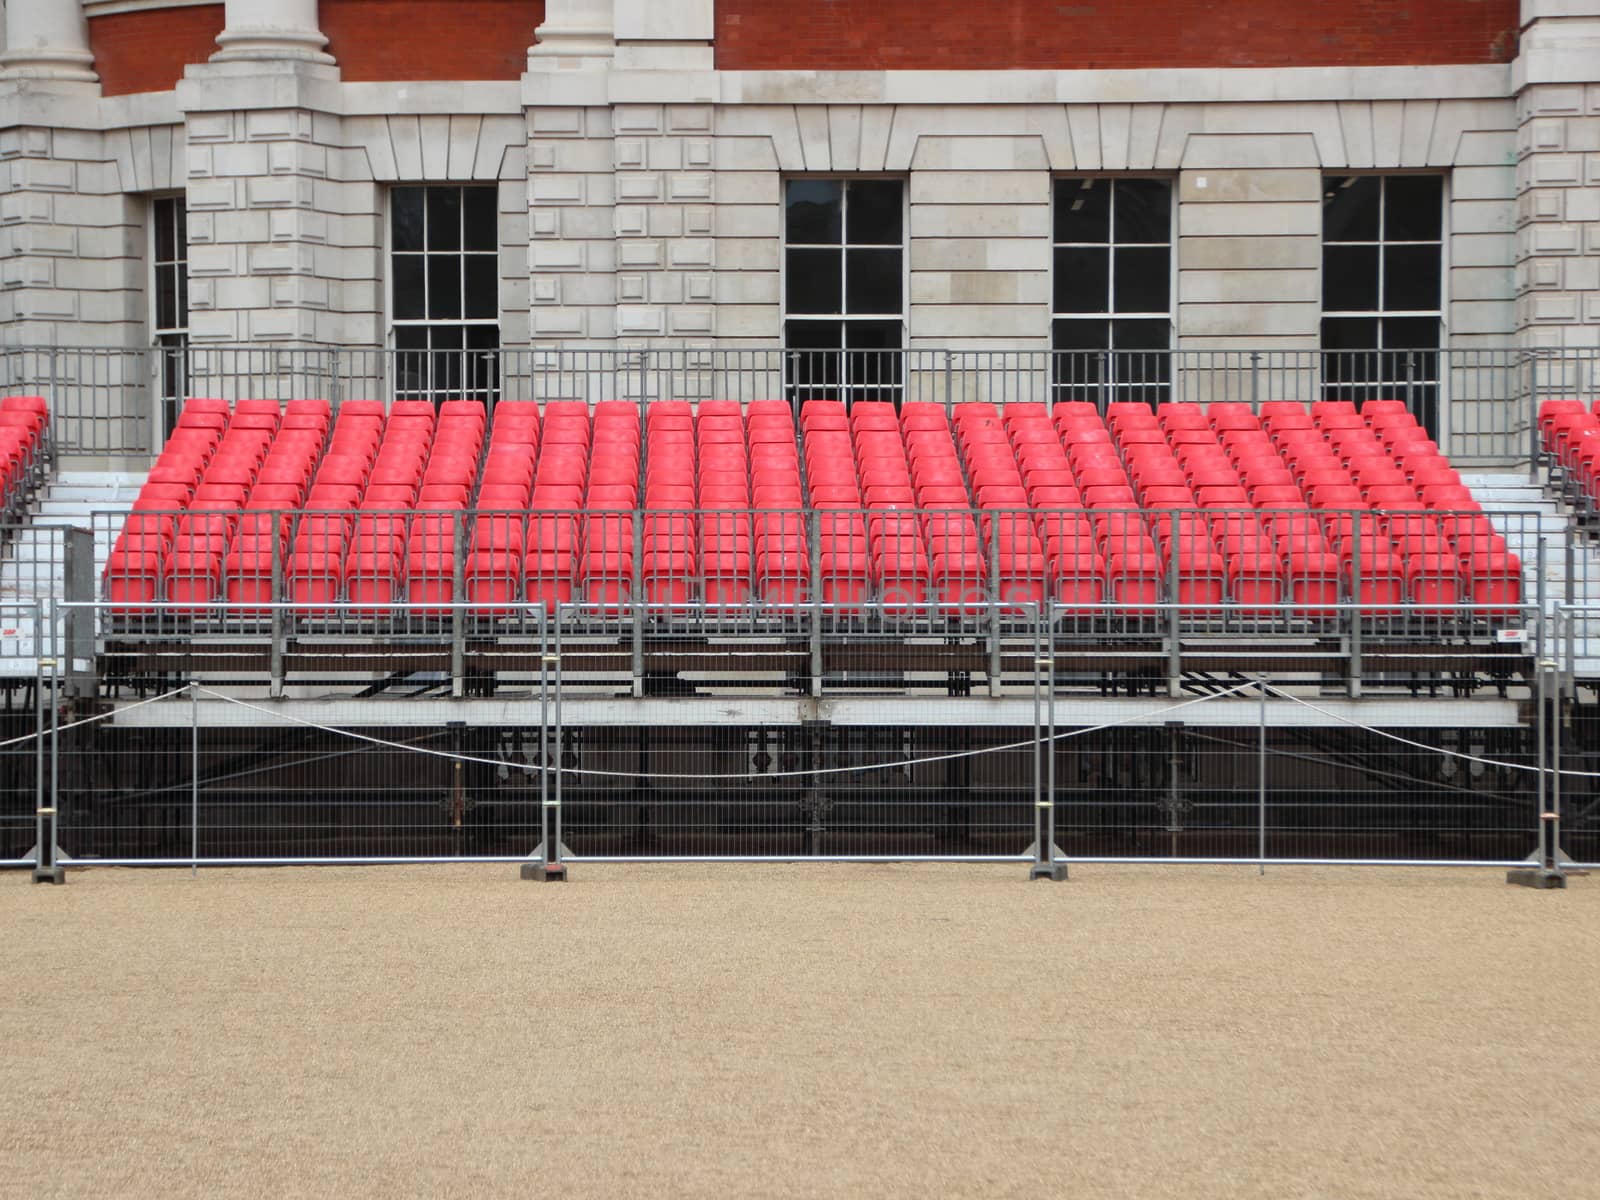 Stand Platform with Rows of Red Plastic Seats by HoleInTheBox